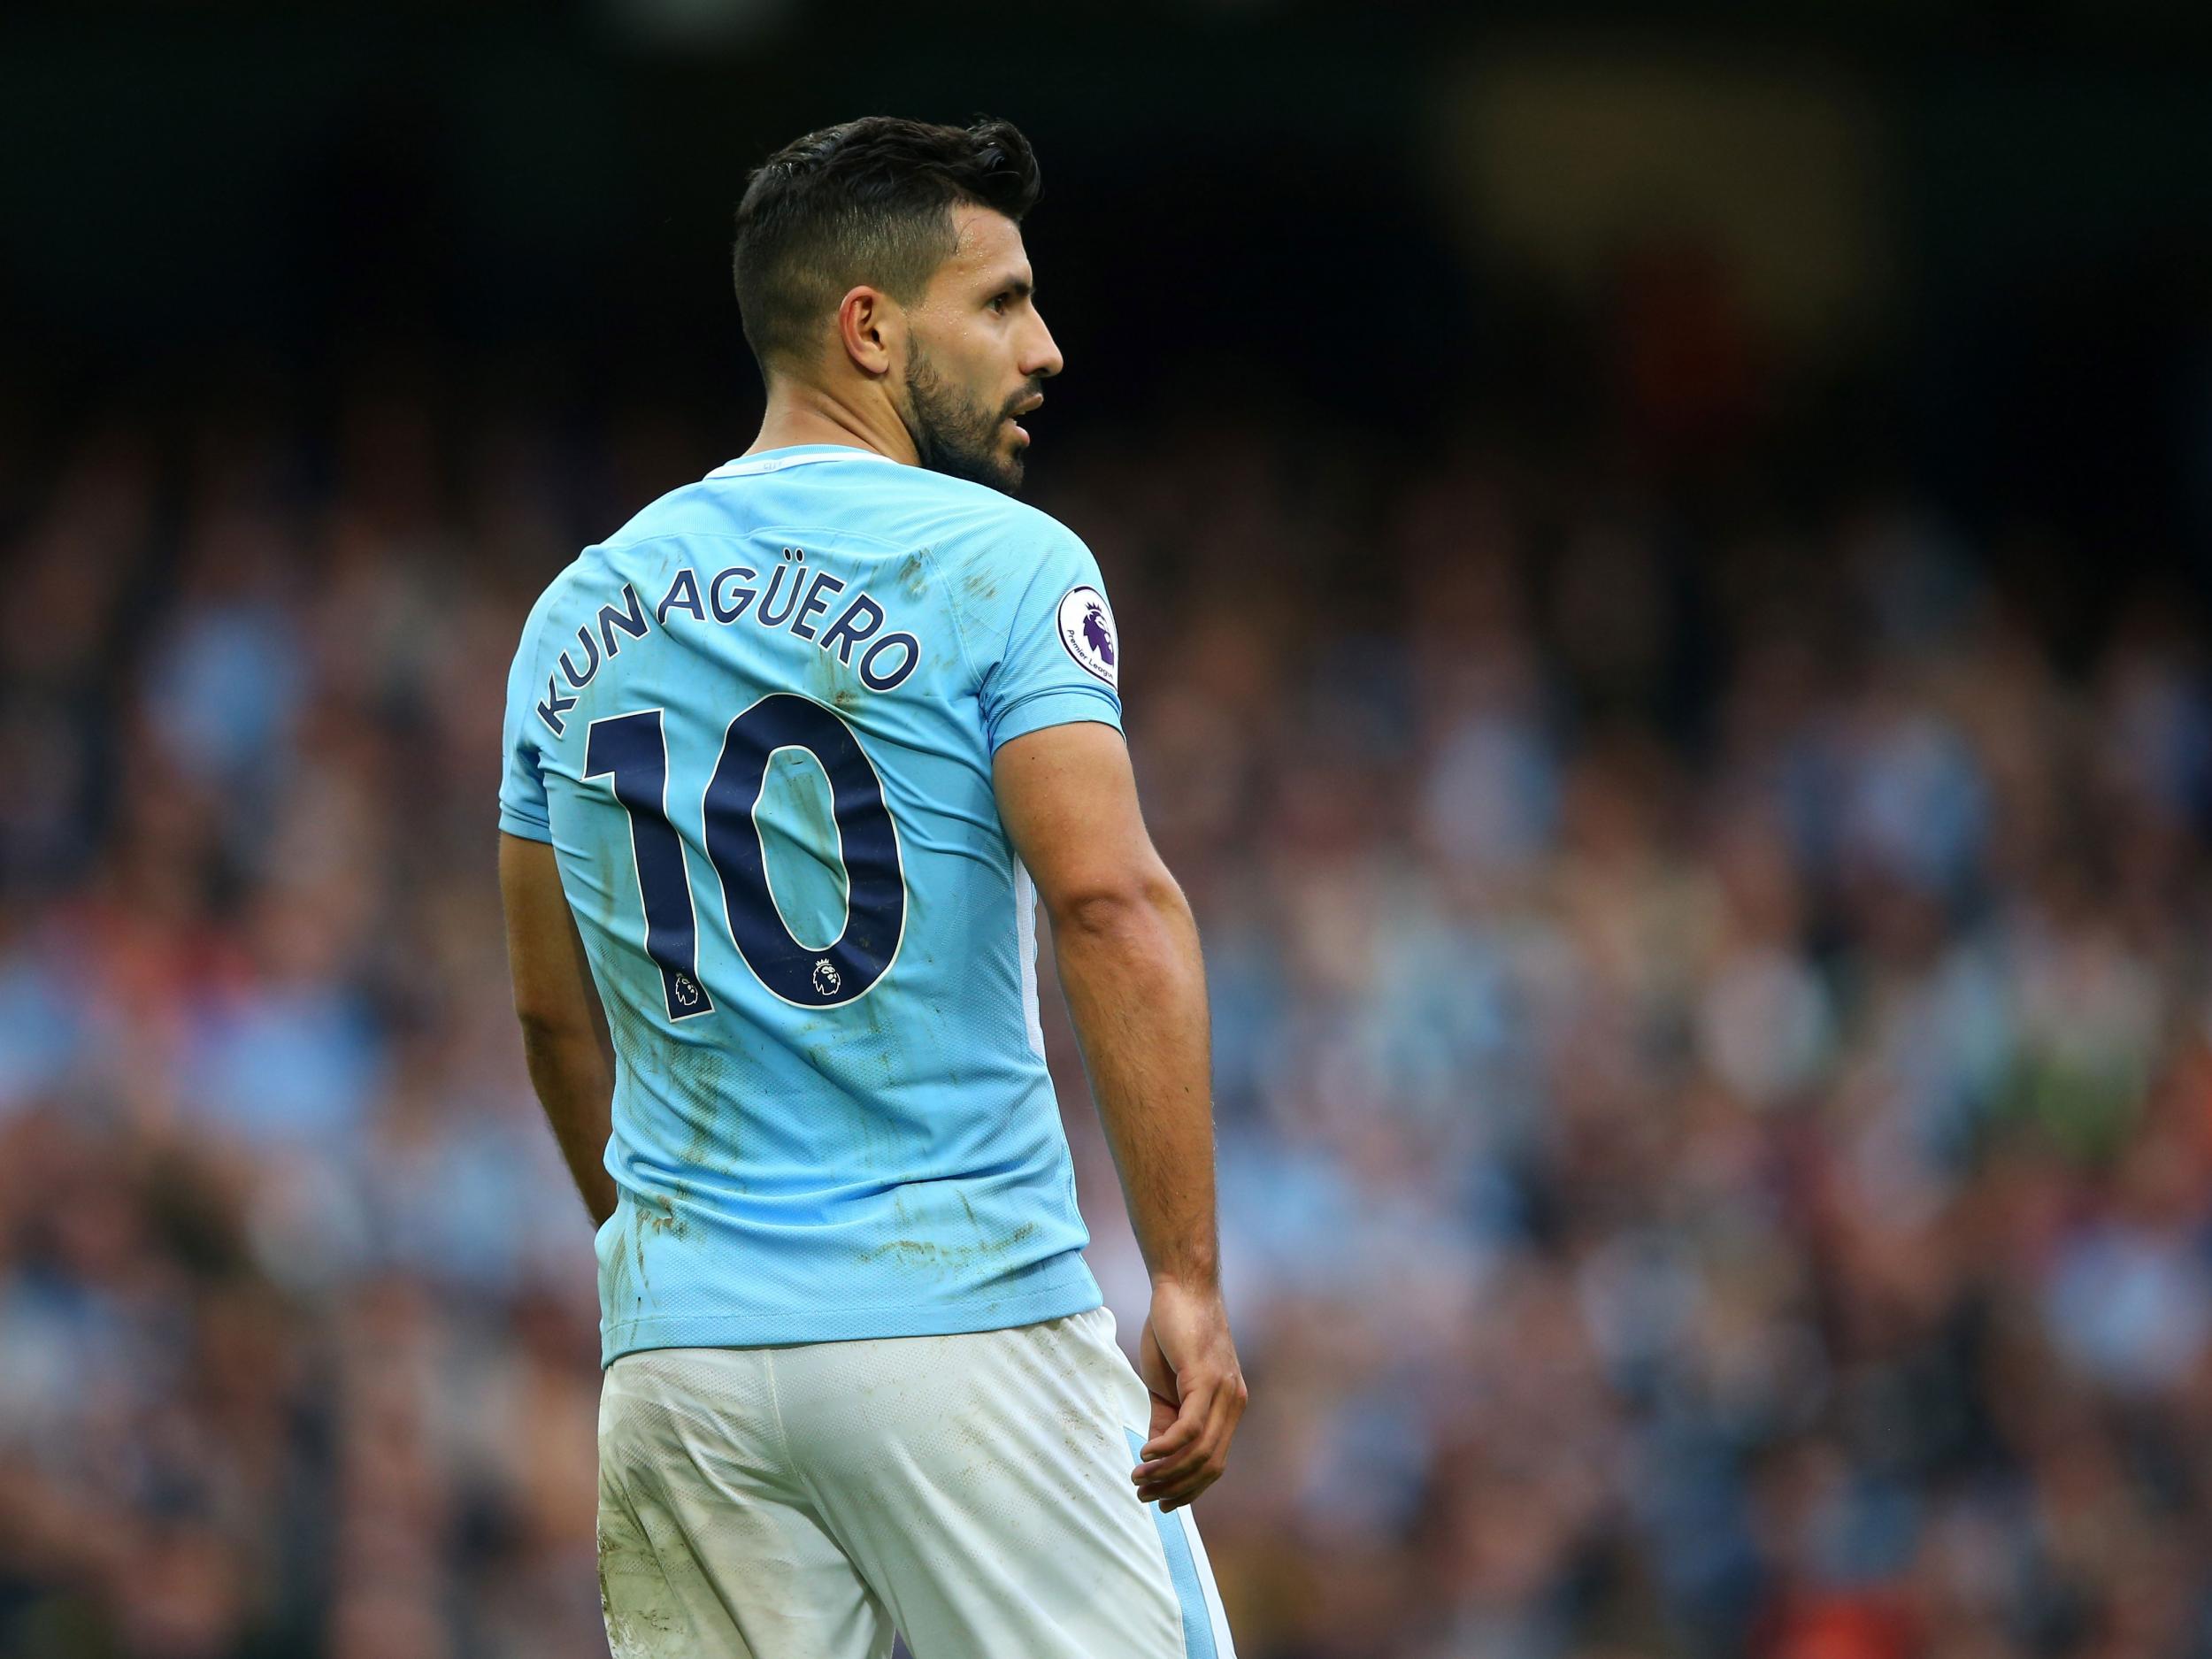 Sergio Aguero will miss Manchester City's trip to Chelsea on Saturday